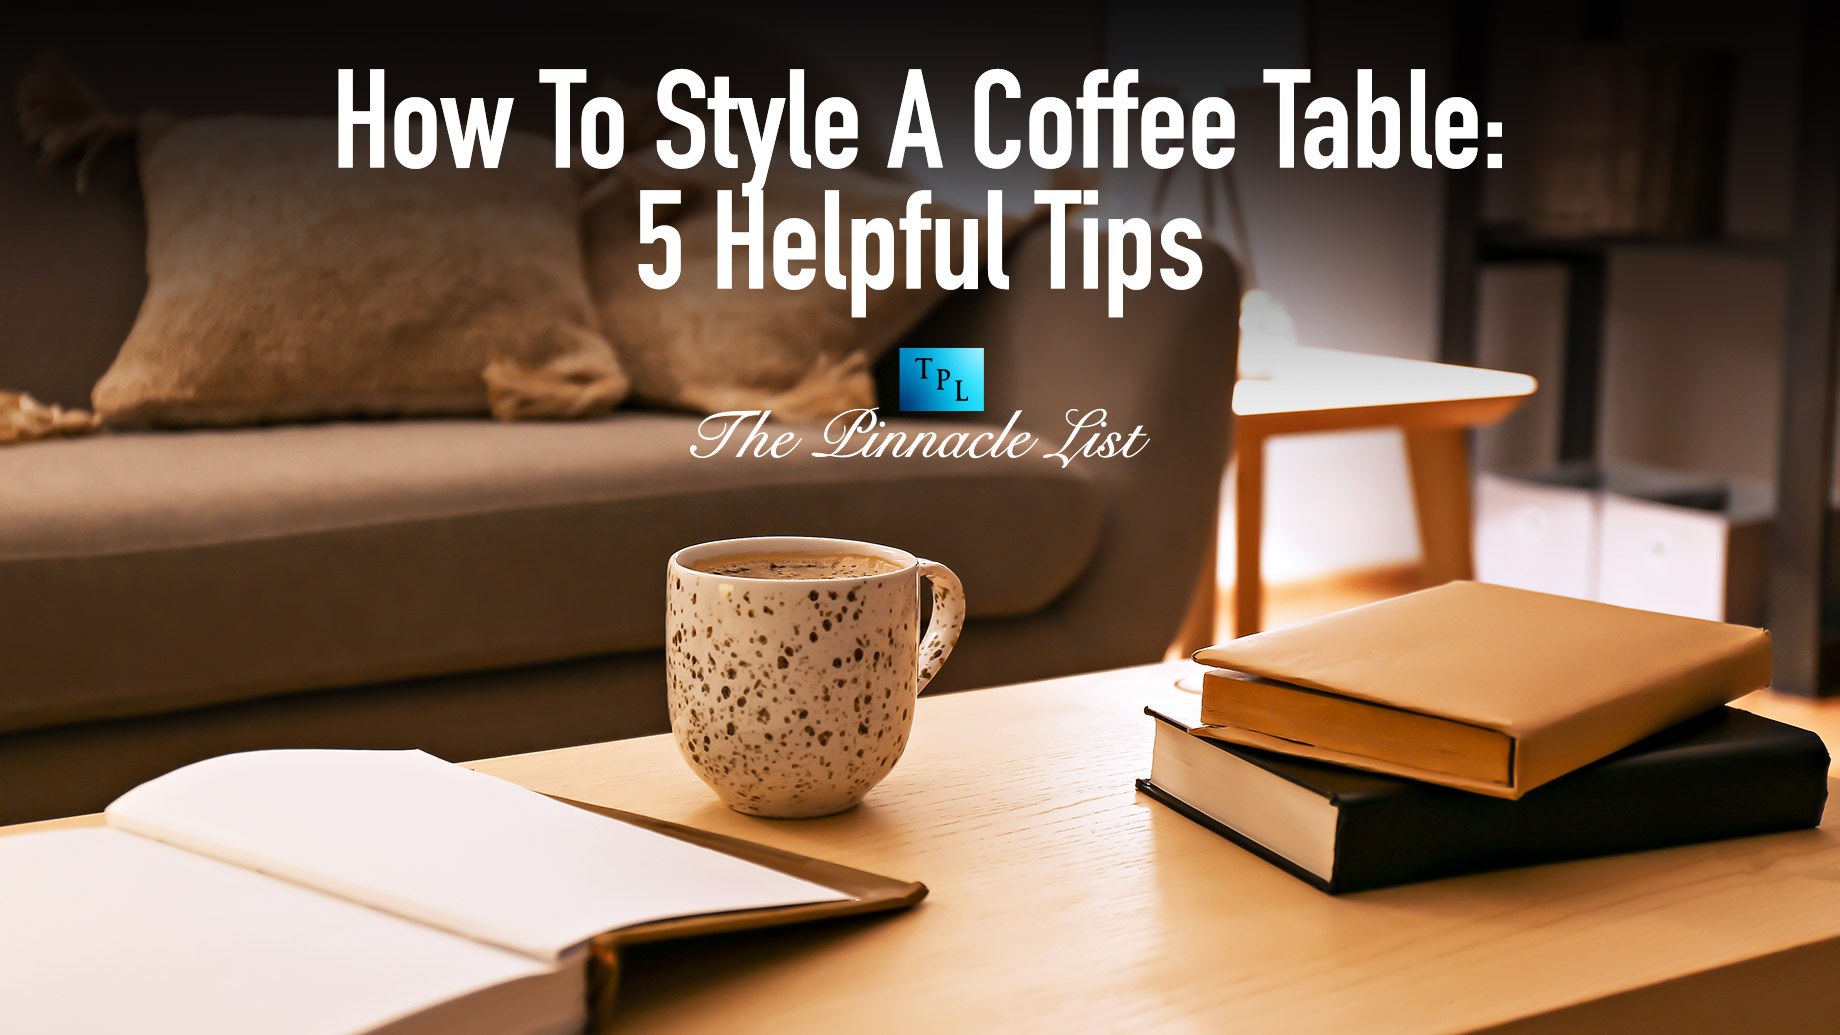 How To Style A Coffee Table: 5 Helpful Tips